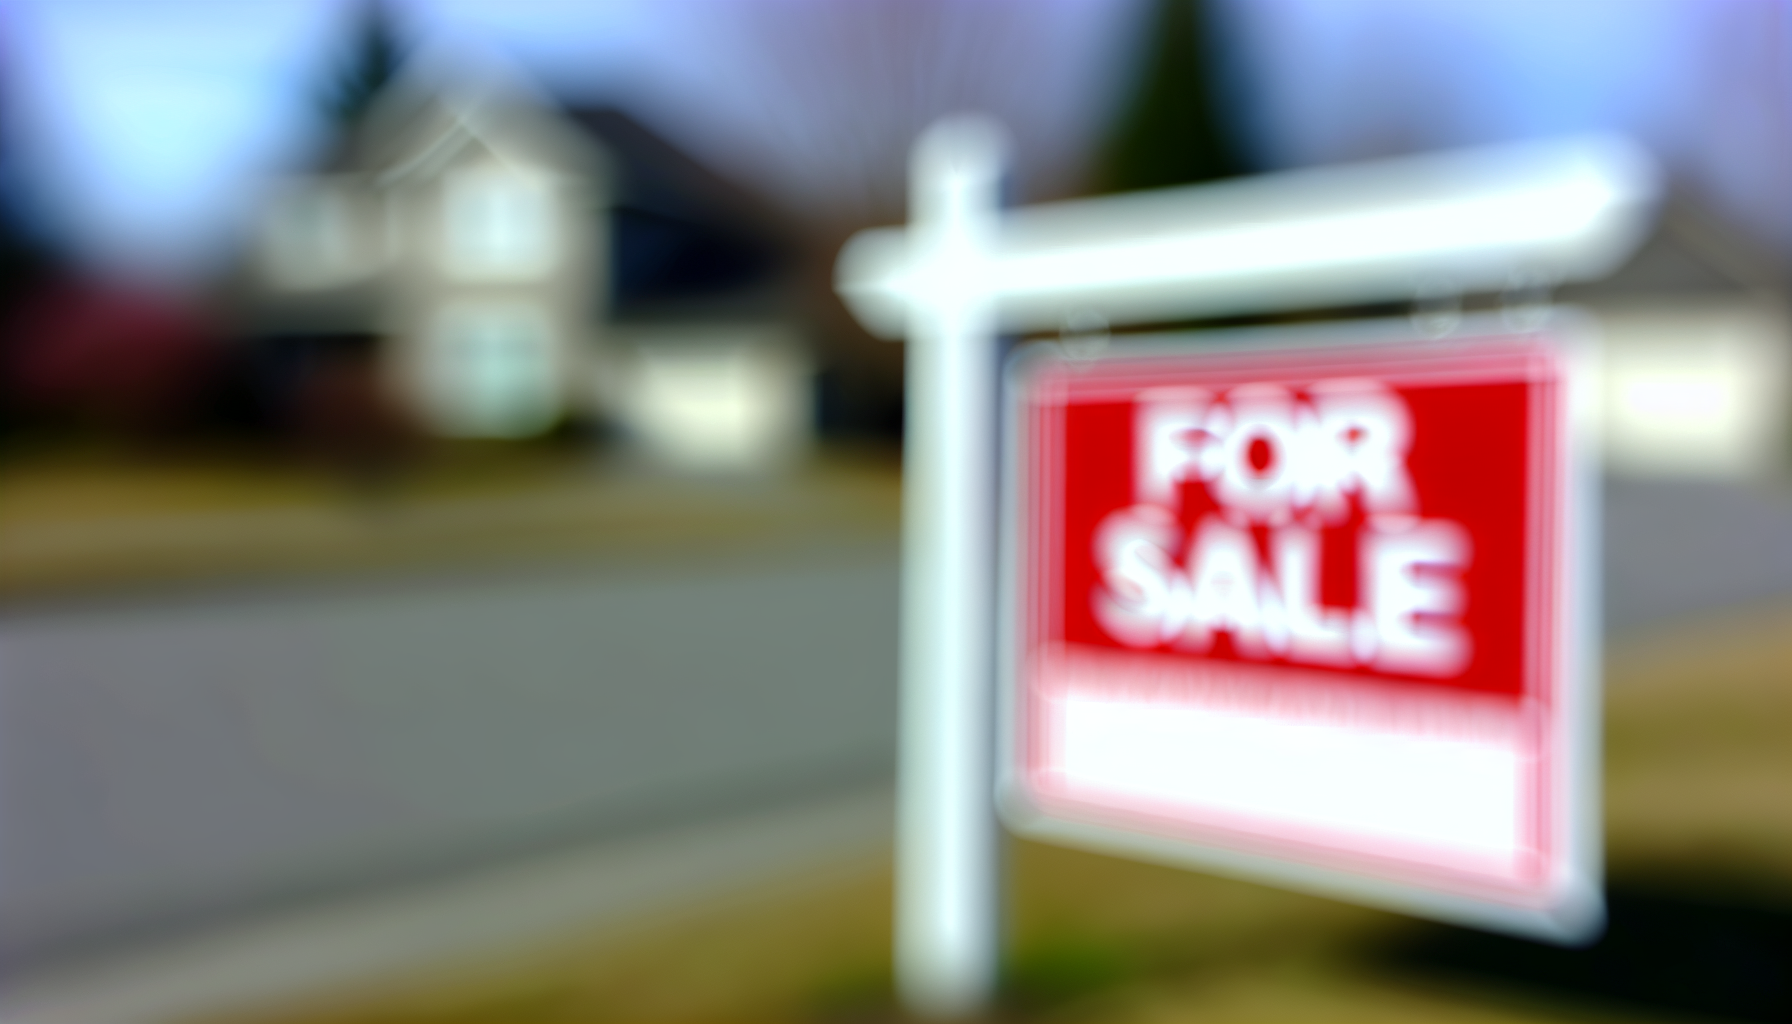 Real estate sign with blurred background